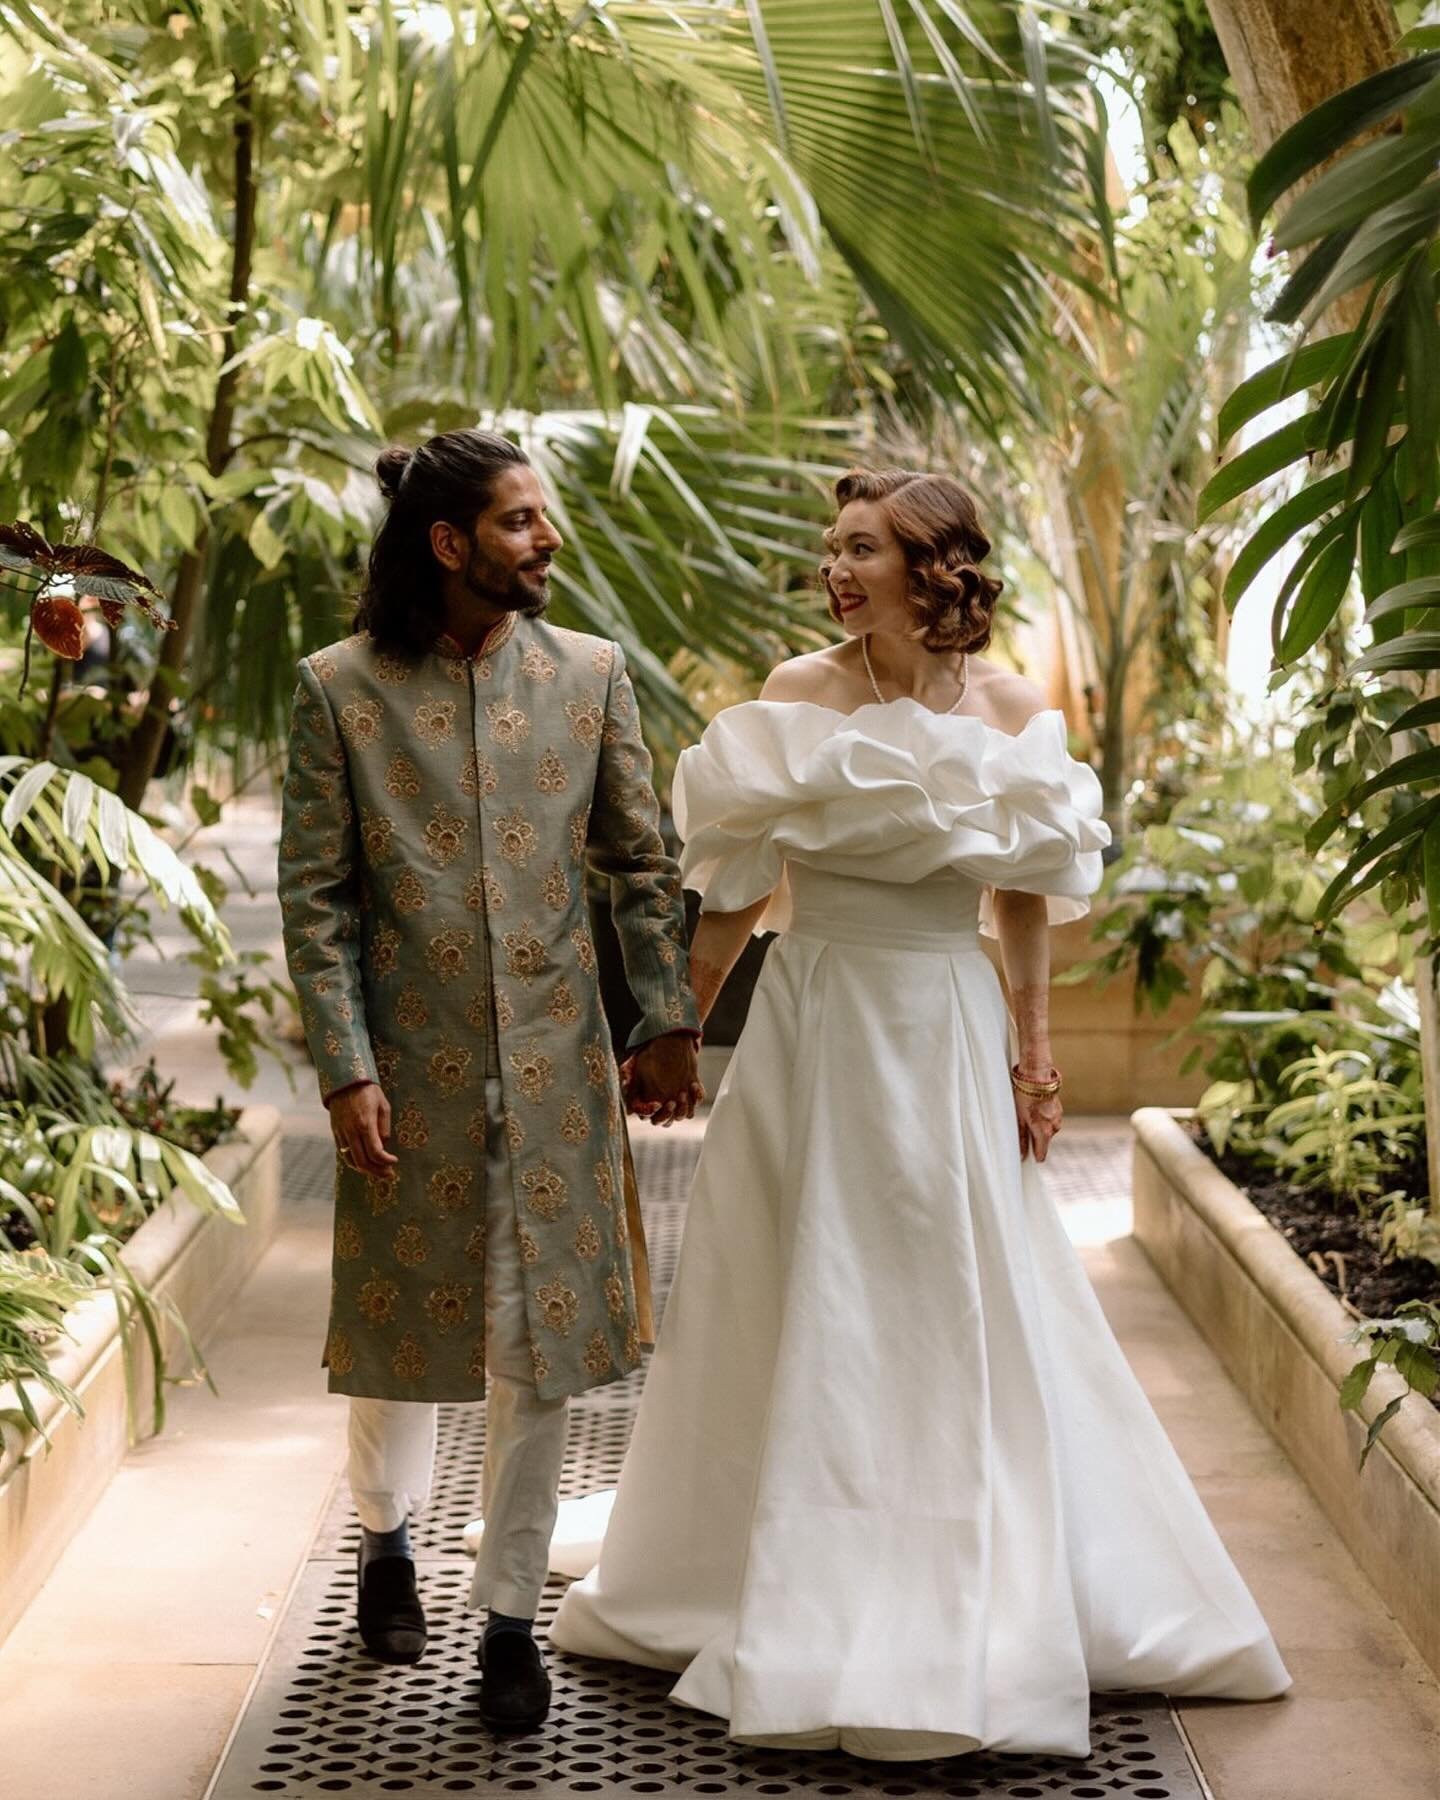 I&amp;M celebrated their love story on the hottest day of the year so far✨. It was full of vibrant colours, culture and fabulous outfit changes. Photographing with these two in the Palm House was a little pinch me moment - a beautiful day to be part 